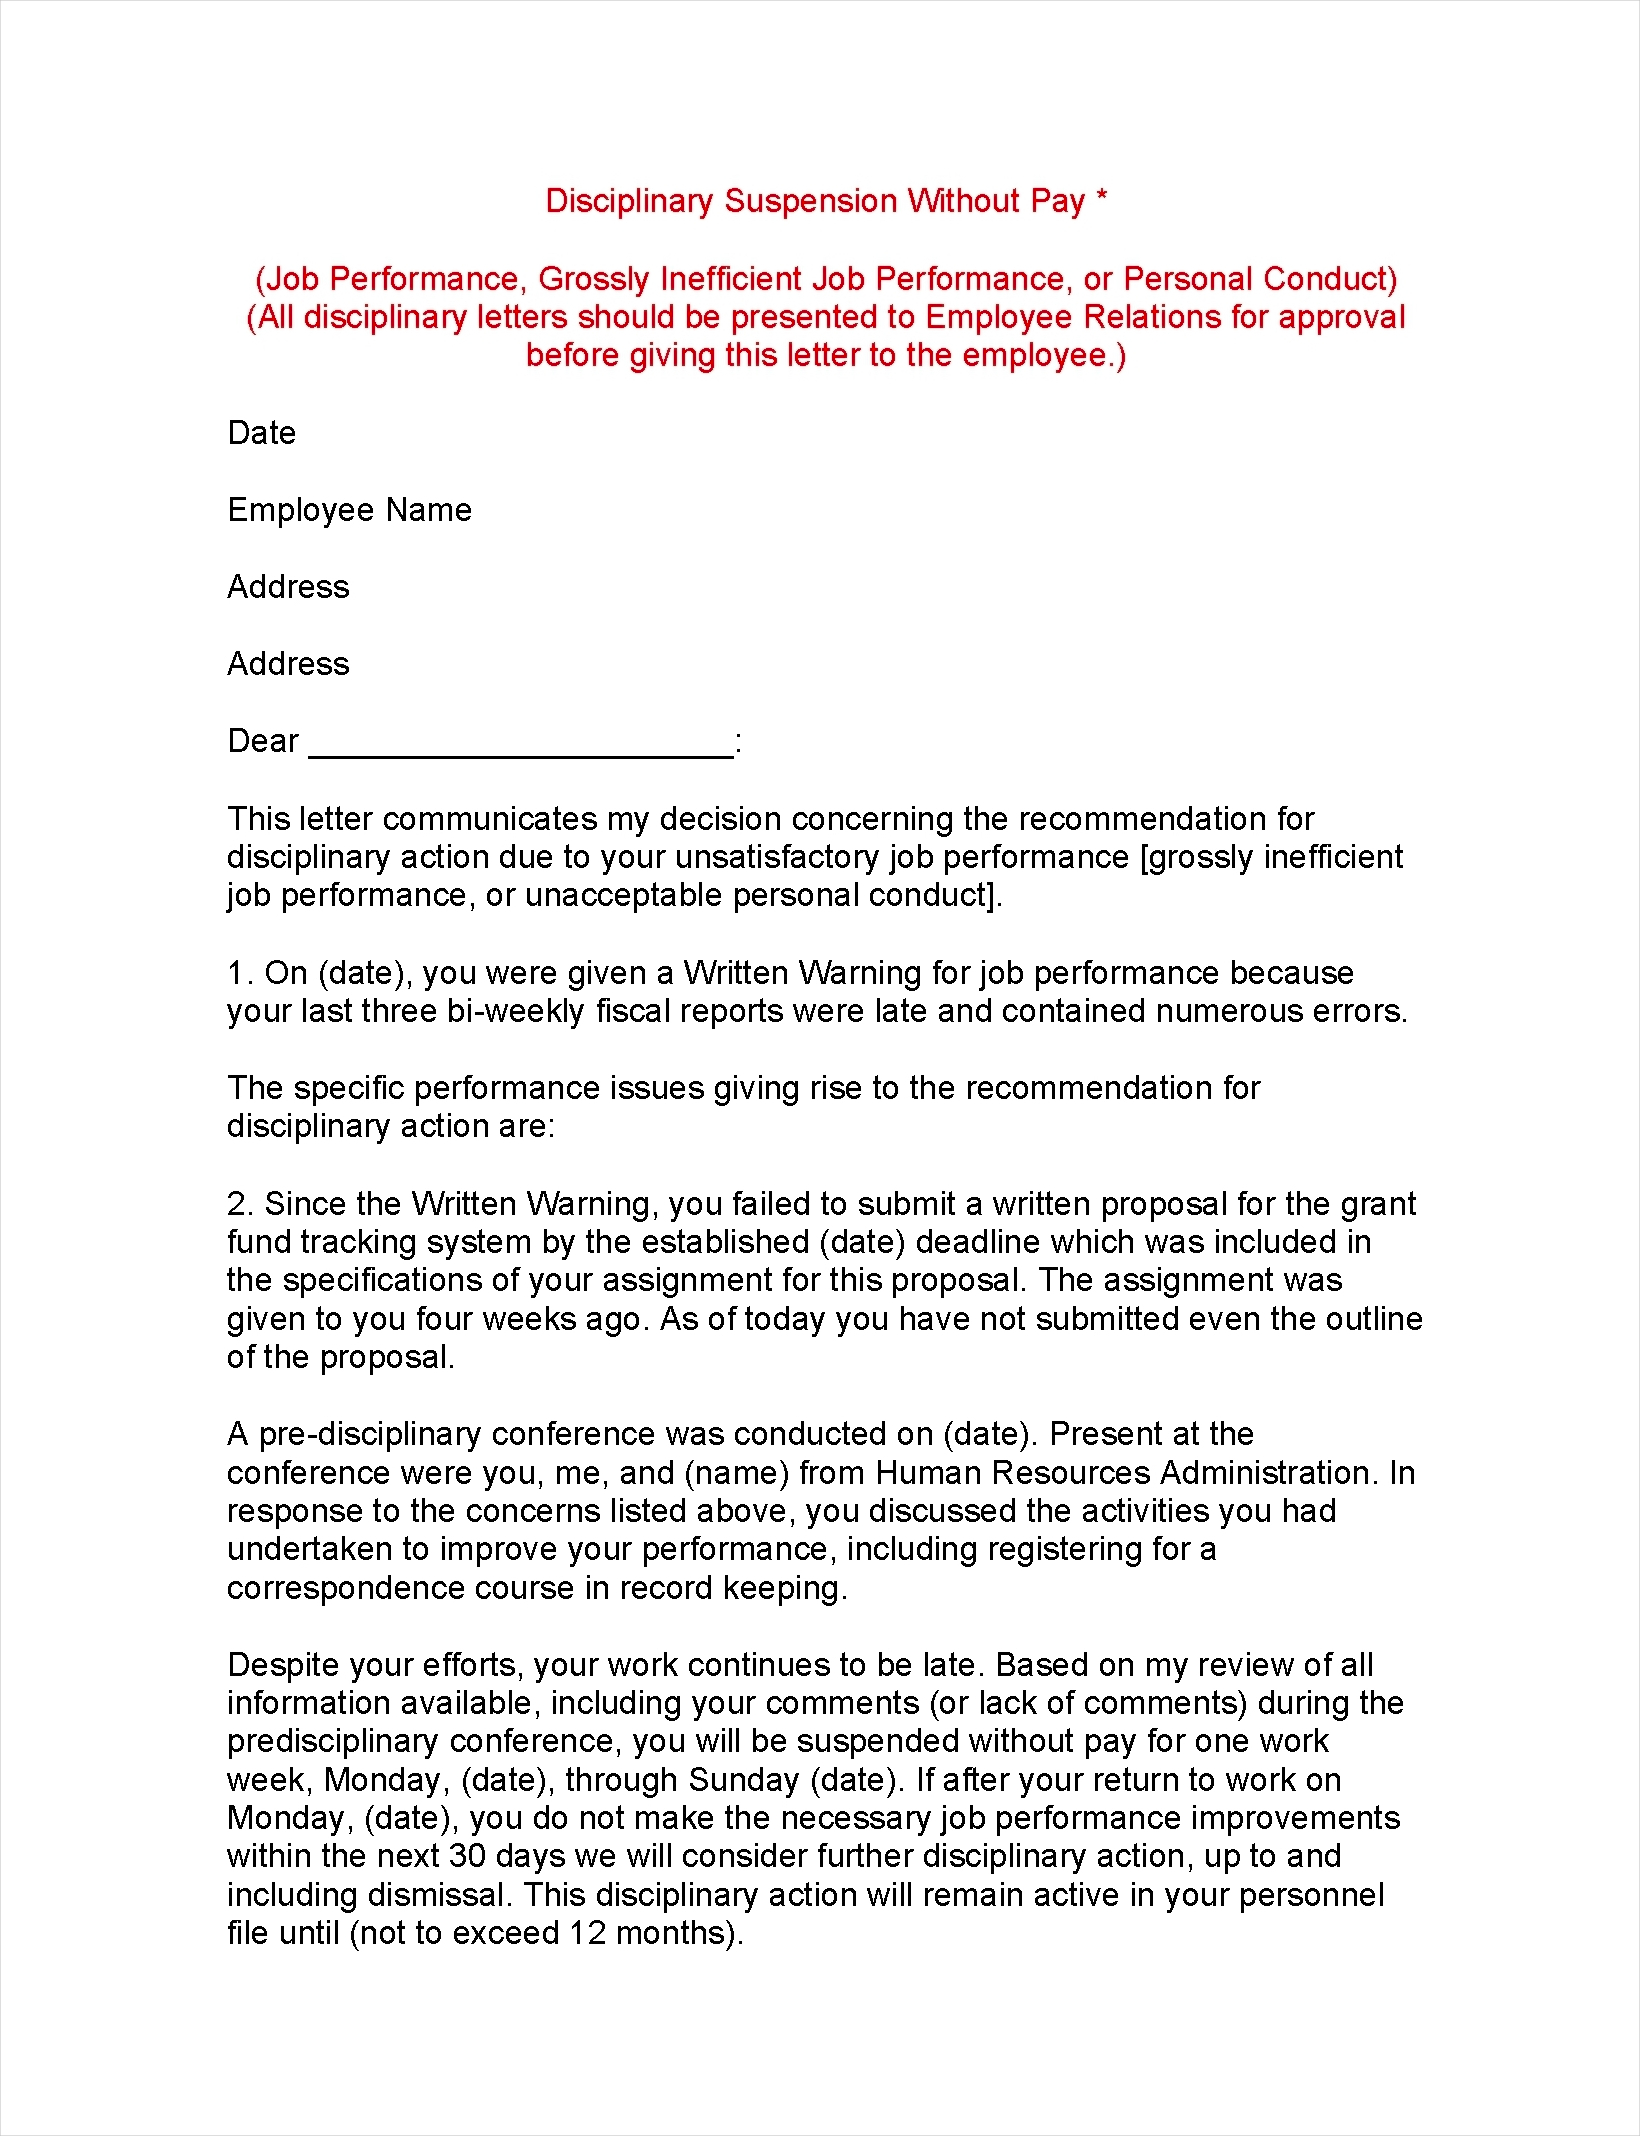 disciplinary suspension letter template